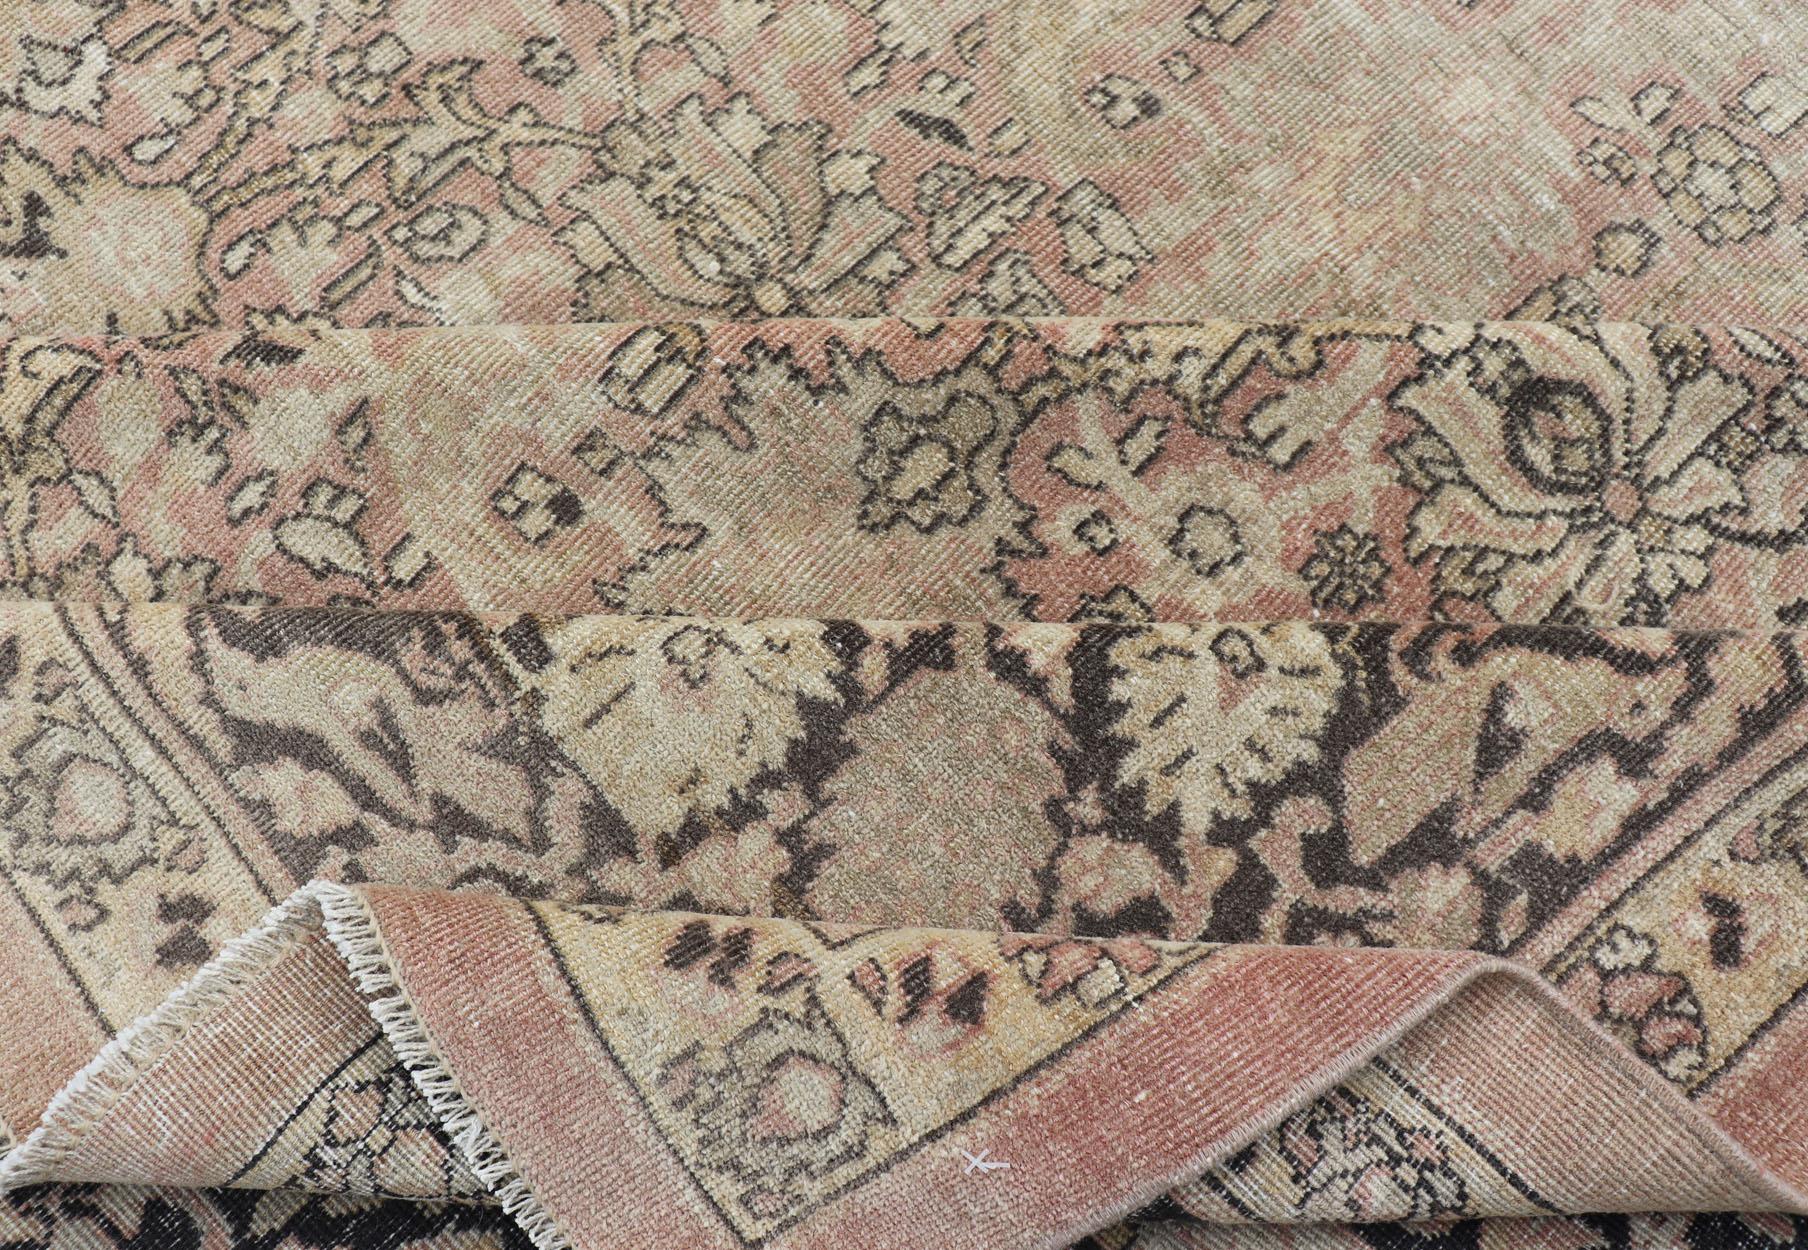 Large Antique Turkish Sivas Rug with Floral Design in Earthy Neutral Tones  For Sale 11